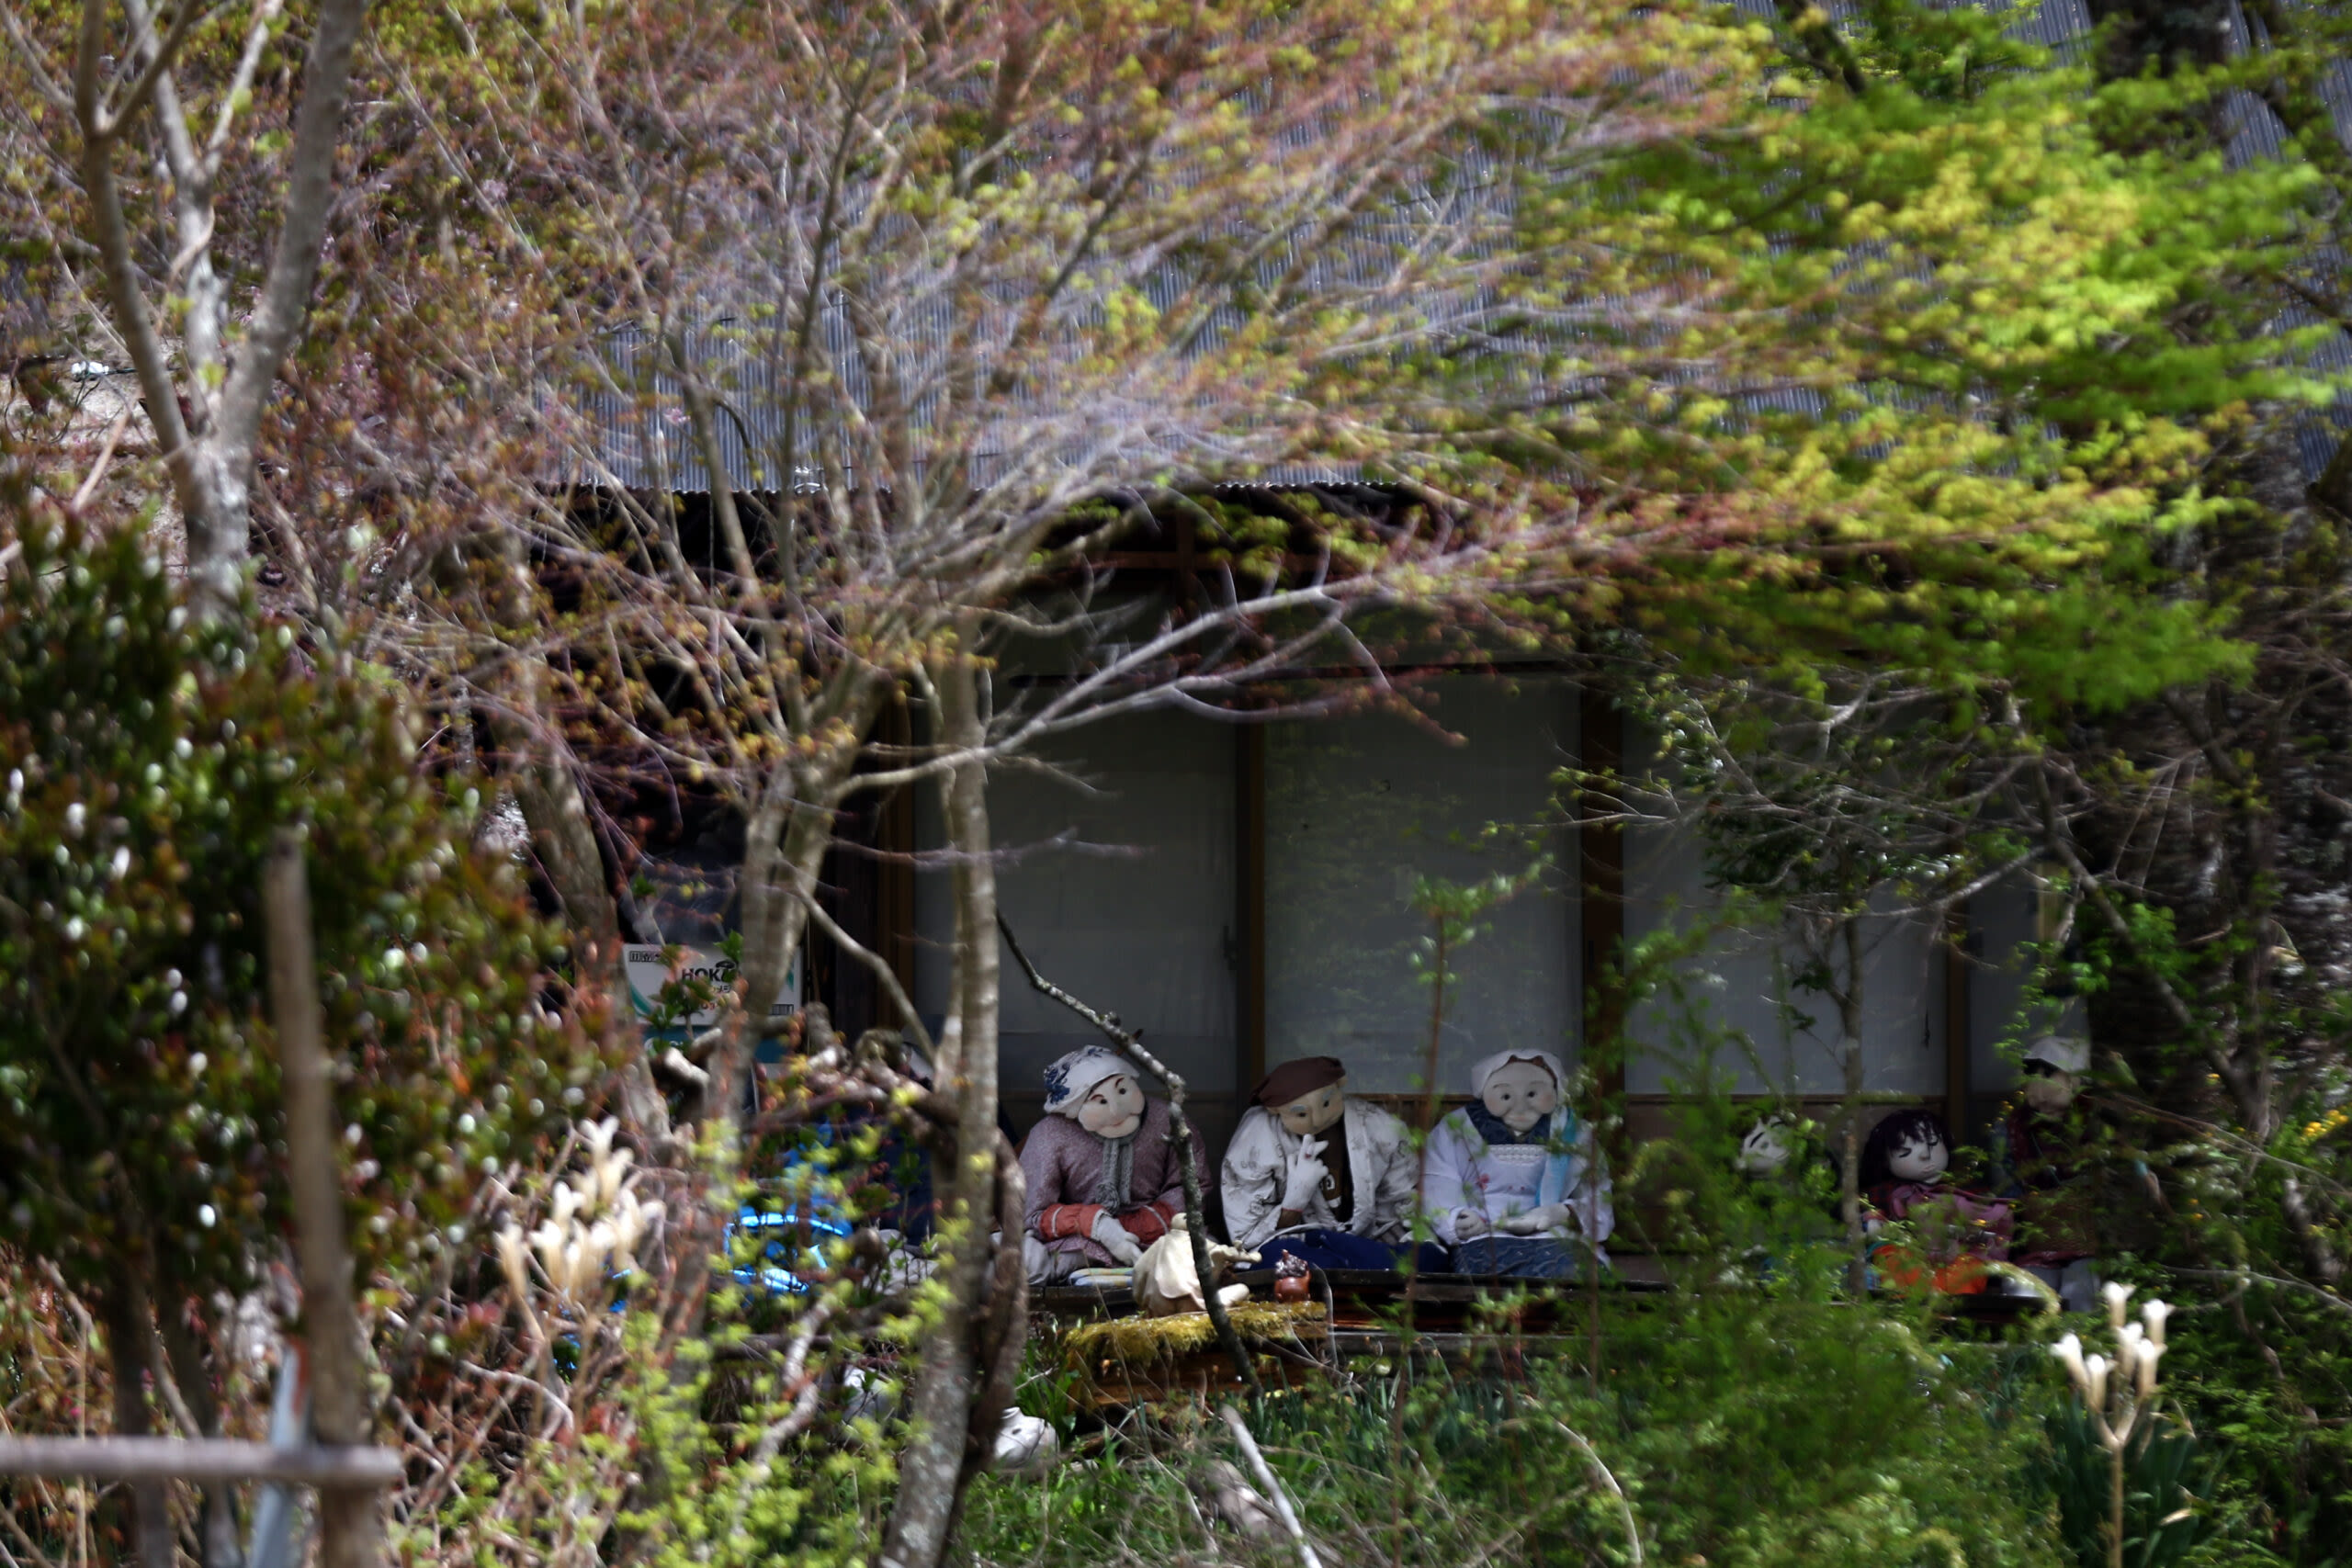 Scariest places on Earth: The Doll Village of Nagoro, Japan